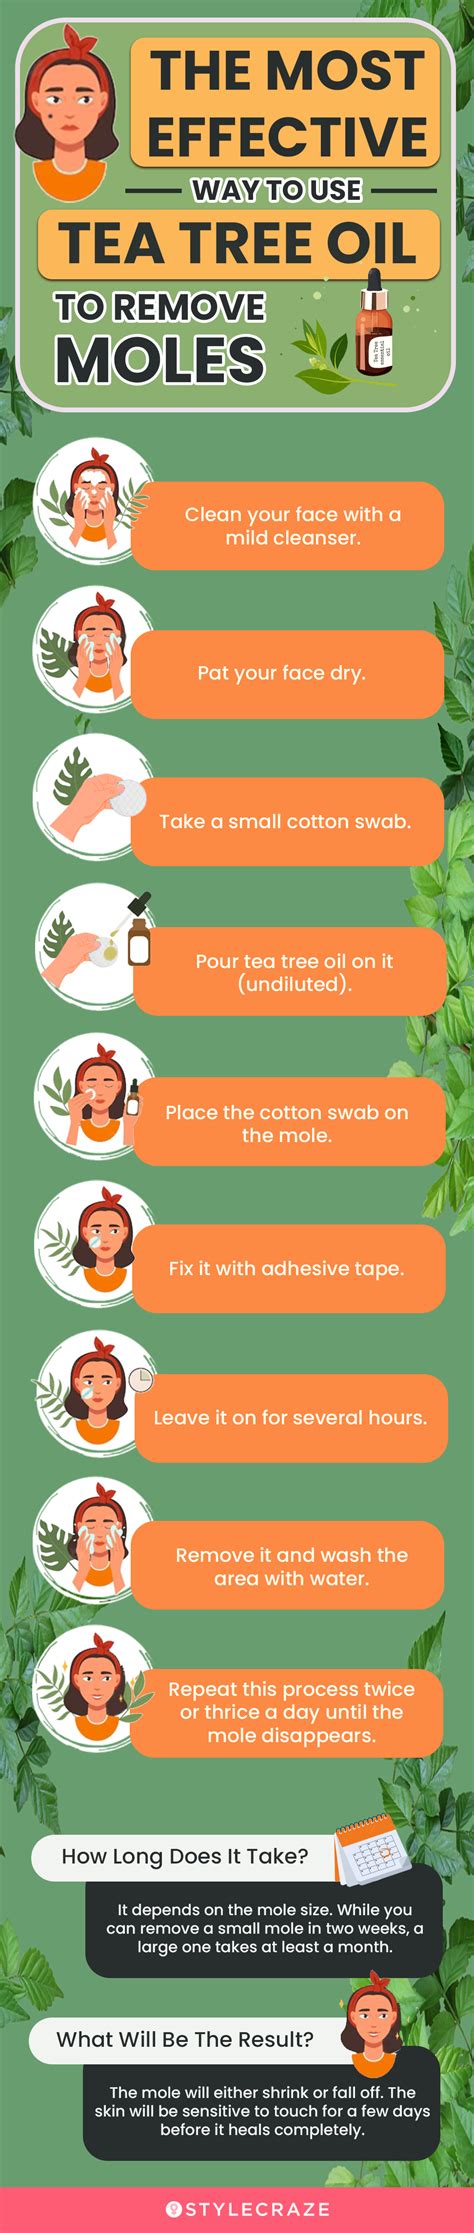 how to use tea tree oil for mole removal methods and precautions